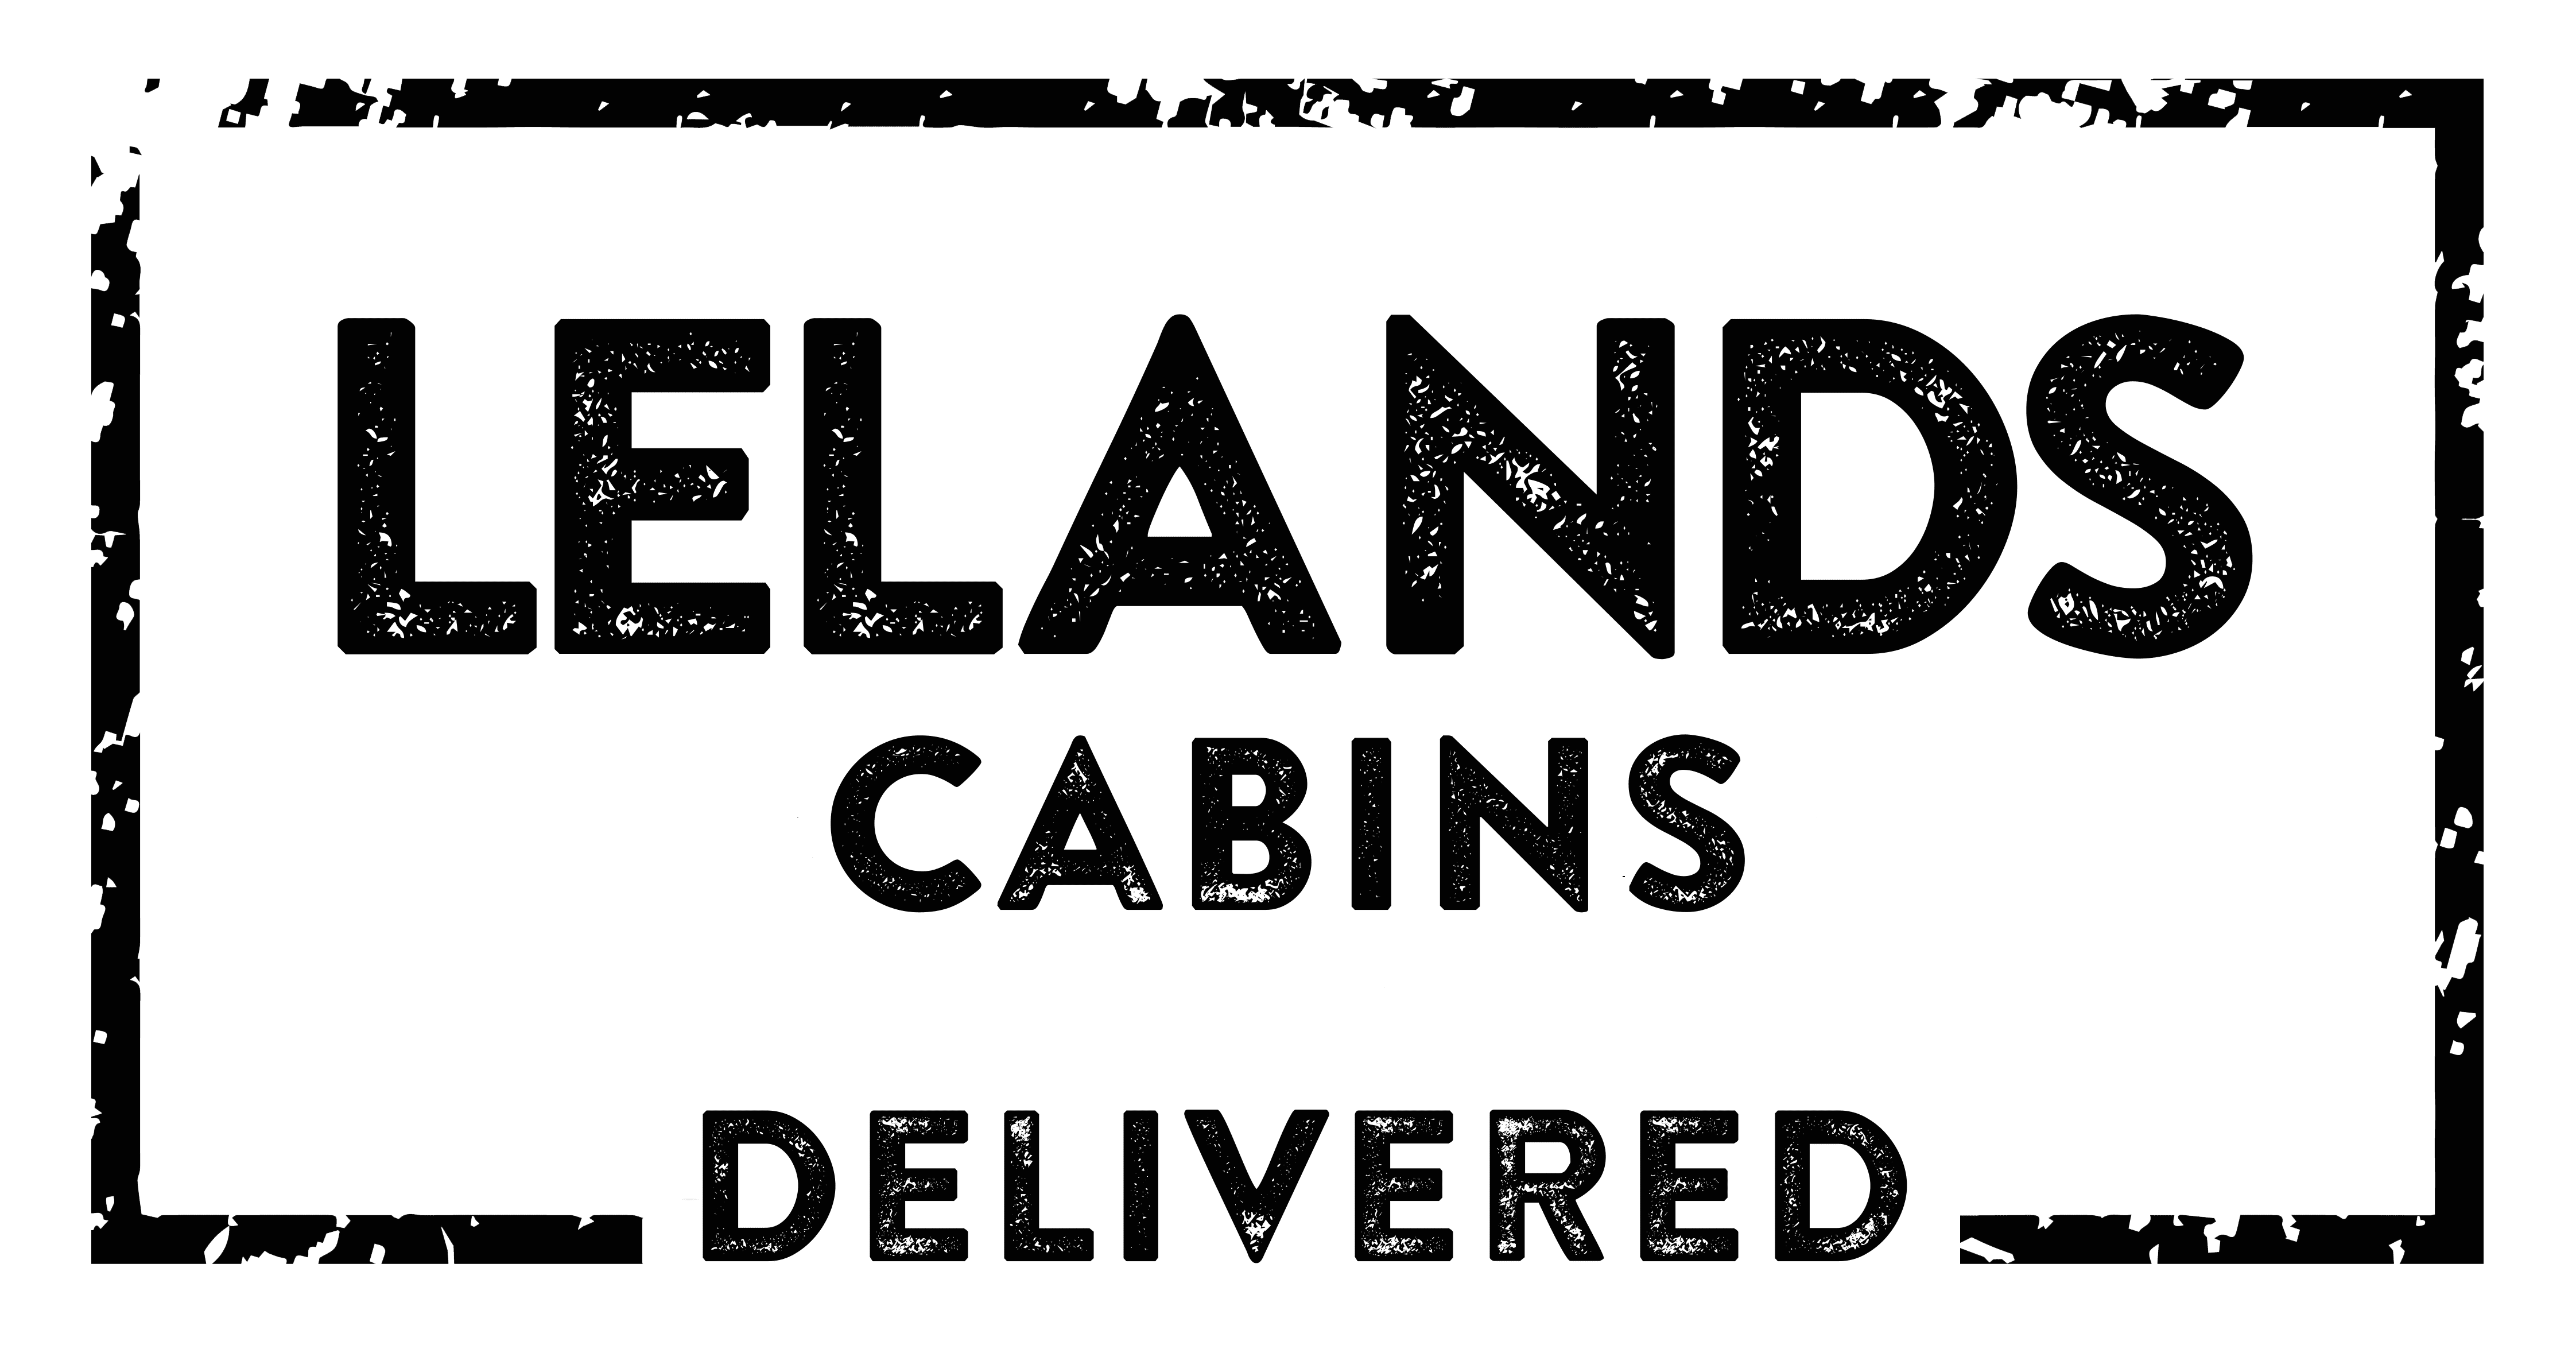 Cabins Blk Rebrand Logo transparent with Blk - Leland's Cabins Certified Modular Cabins and Tiny Homes